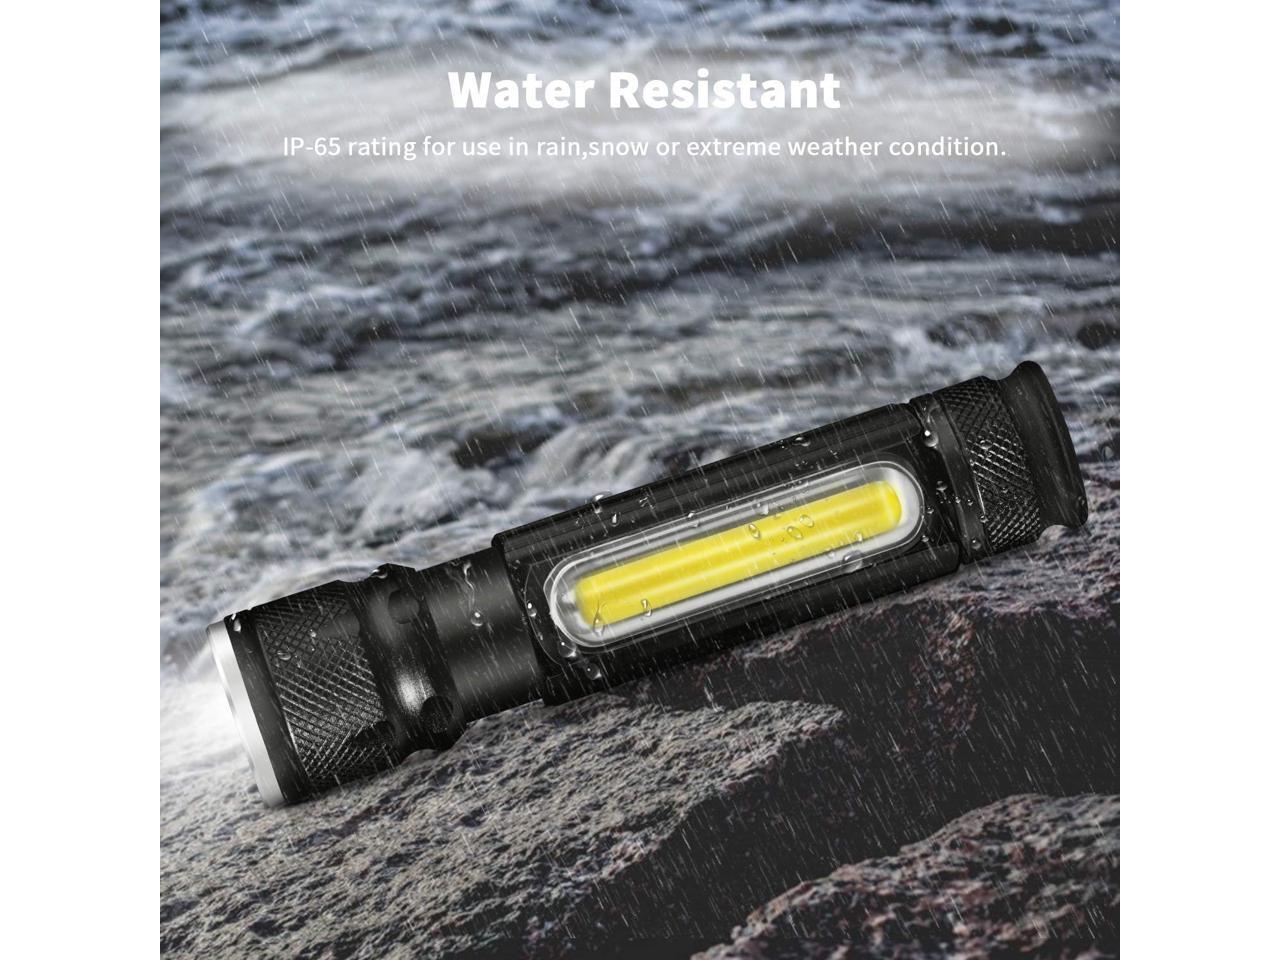 USB Rechargeable Tactical Flashlight,Cofuture LED Handheld Flashlight with Side Light and Magnet,Built-in 18650 Battery,Zoomable,4 Modes,IP65 Water Resistant,for Camping,Hiking,Emergency and Daily Use 